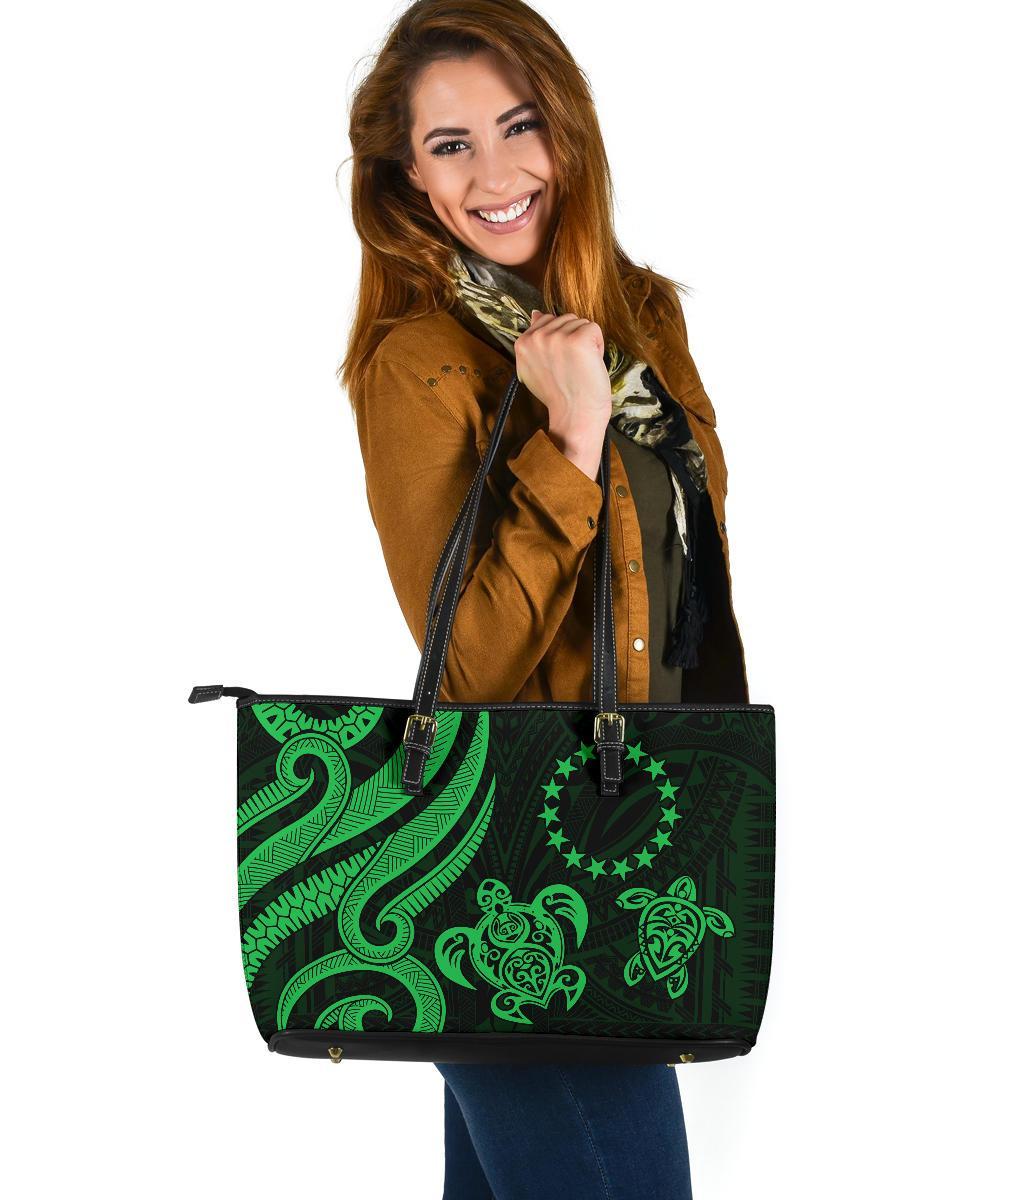 Cook Islands Leather Tote Bag - Green Tentacle Turtle Green - Polynesian Pride